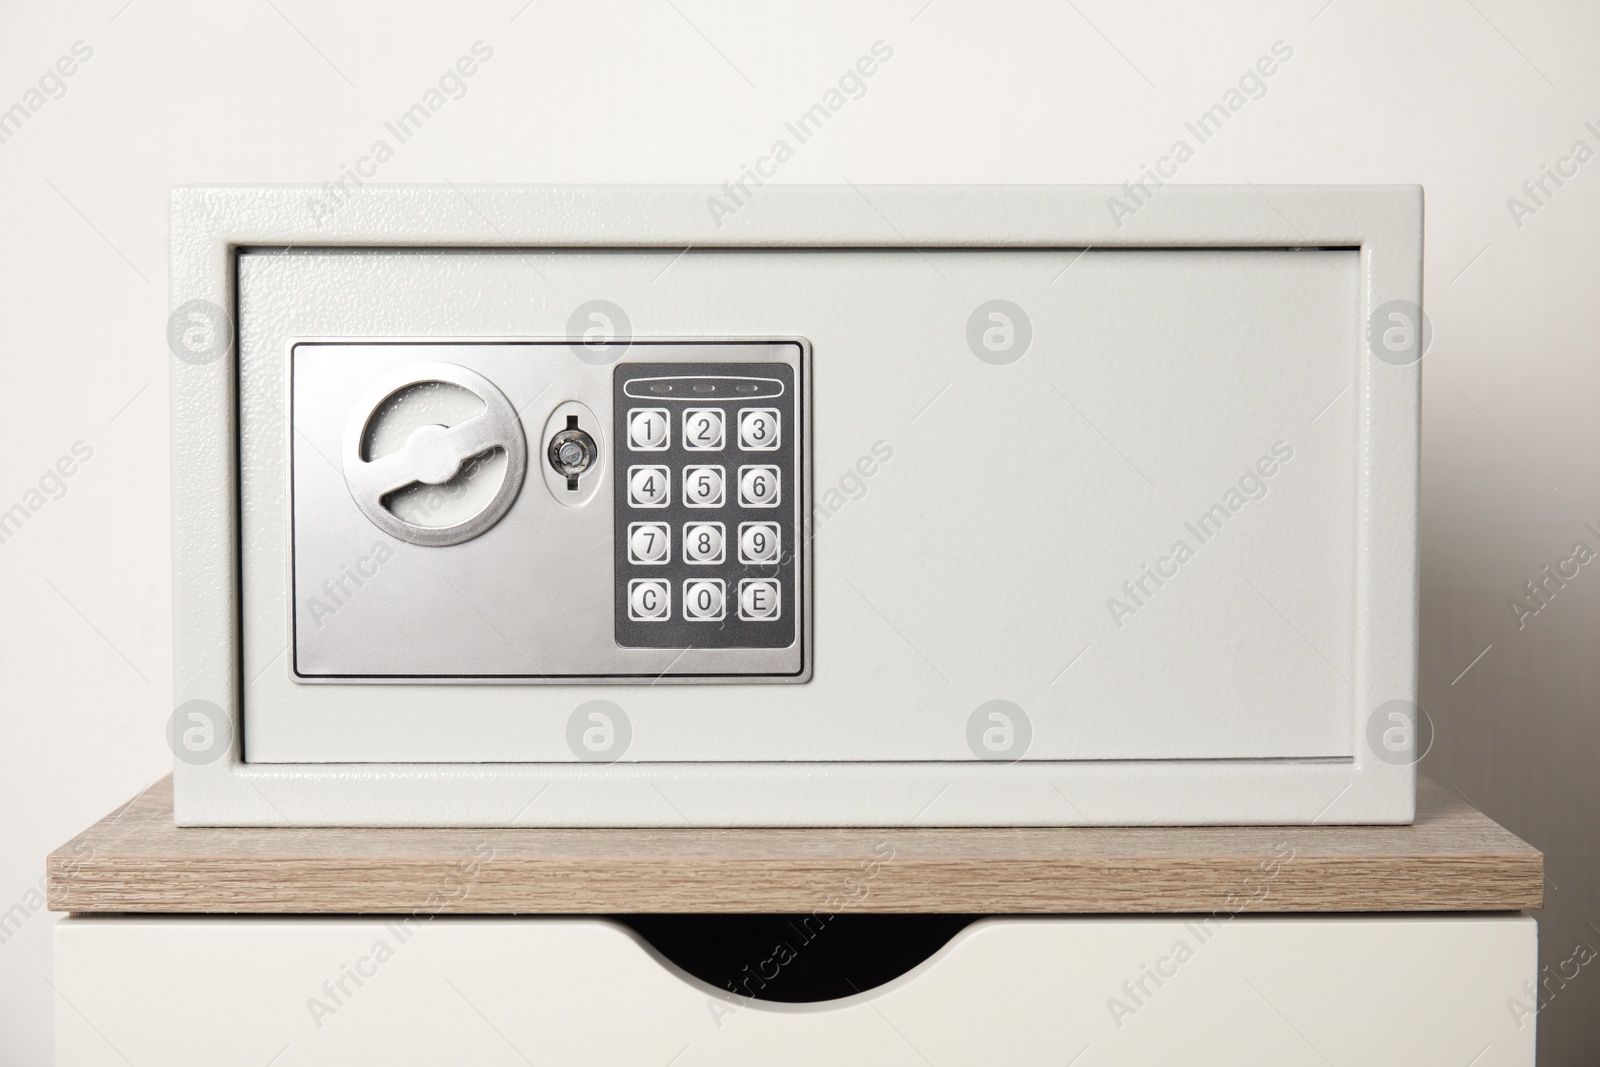 Photo of Closed steel safe on wooden table against white background